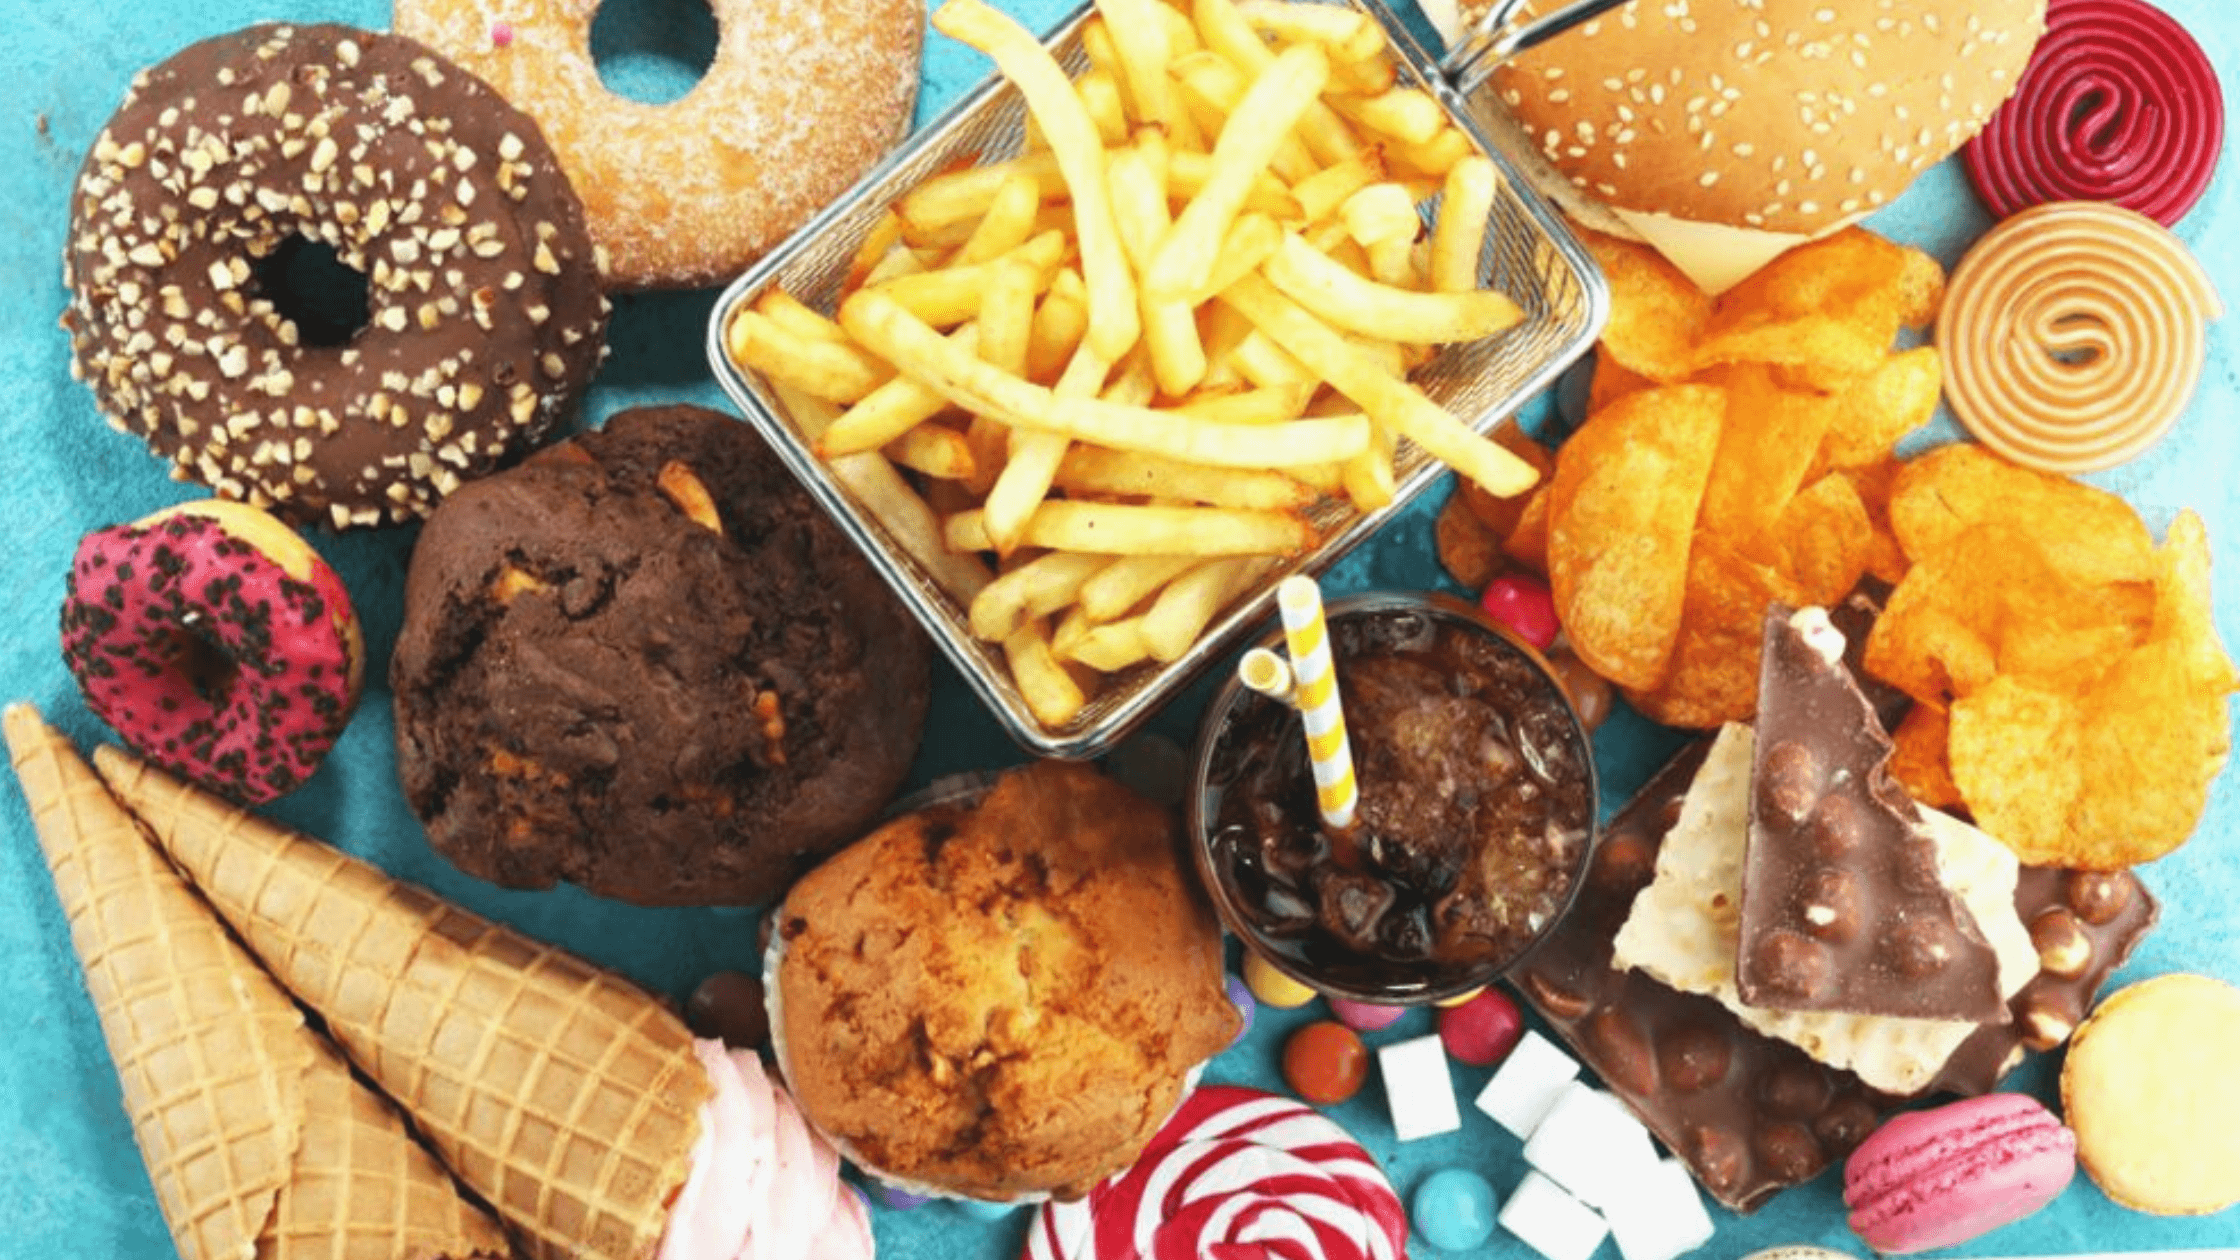 Ultra-Processed Foods' Effects on Cognitive Function